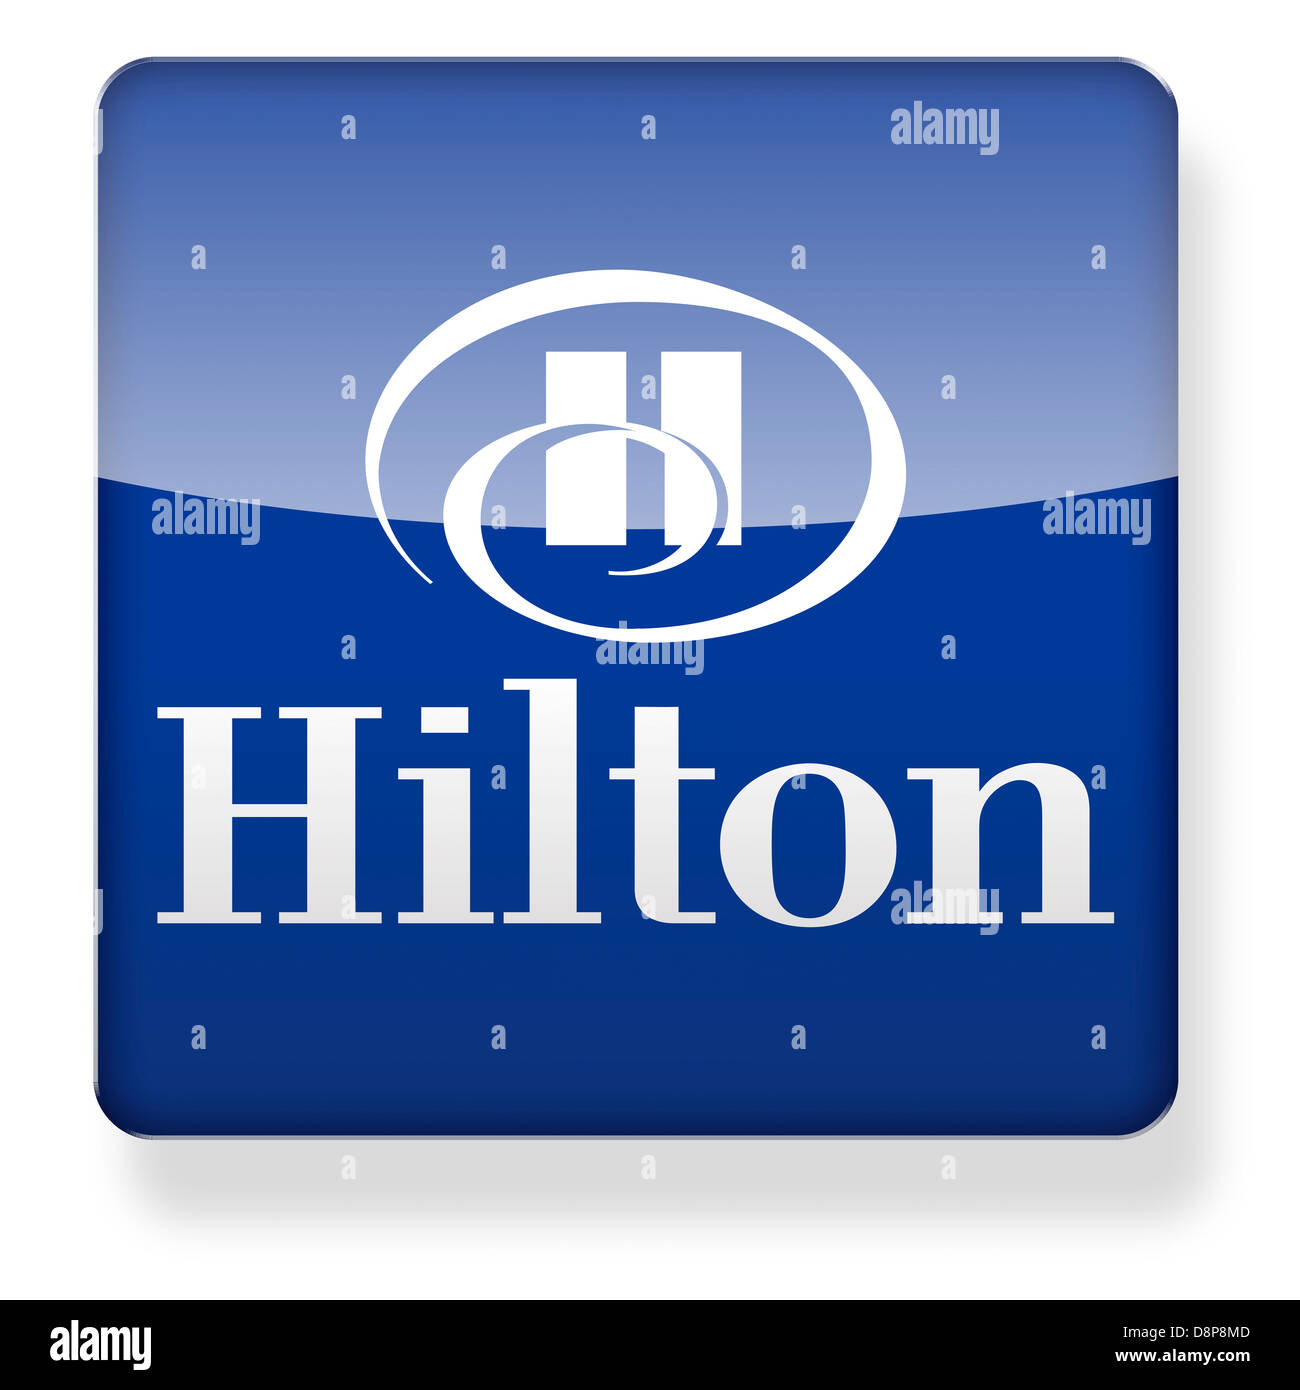 Hilton hotels logo as an app icon. Clipping path included. Stock Photo